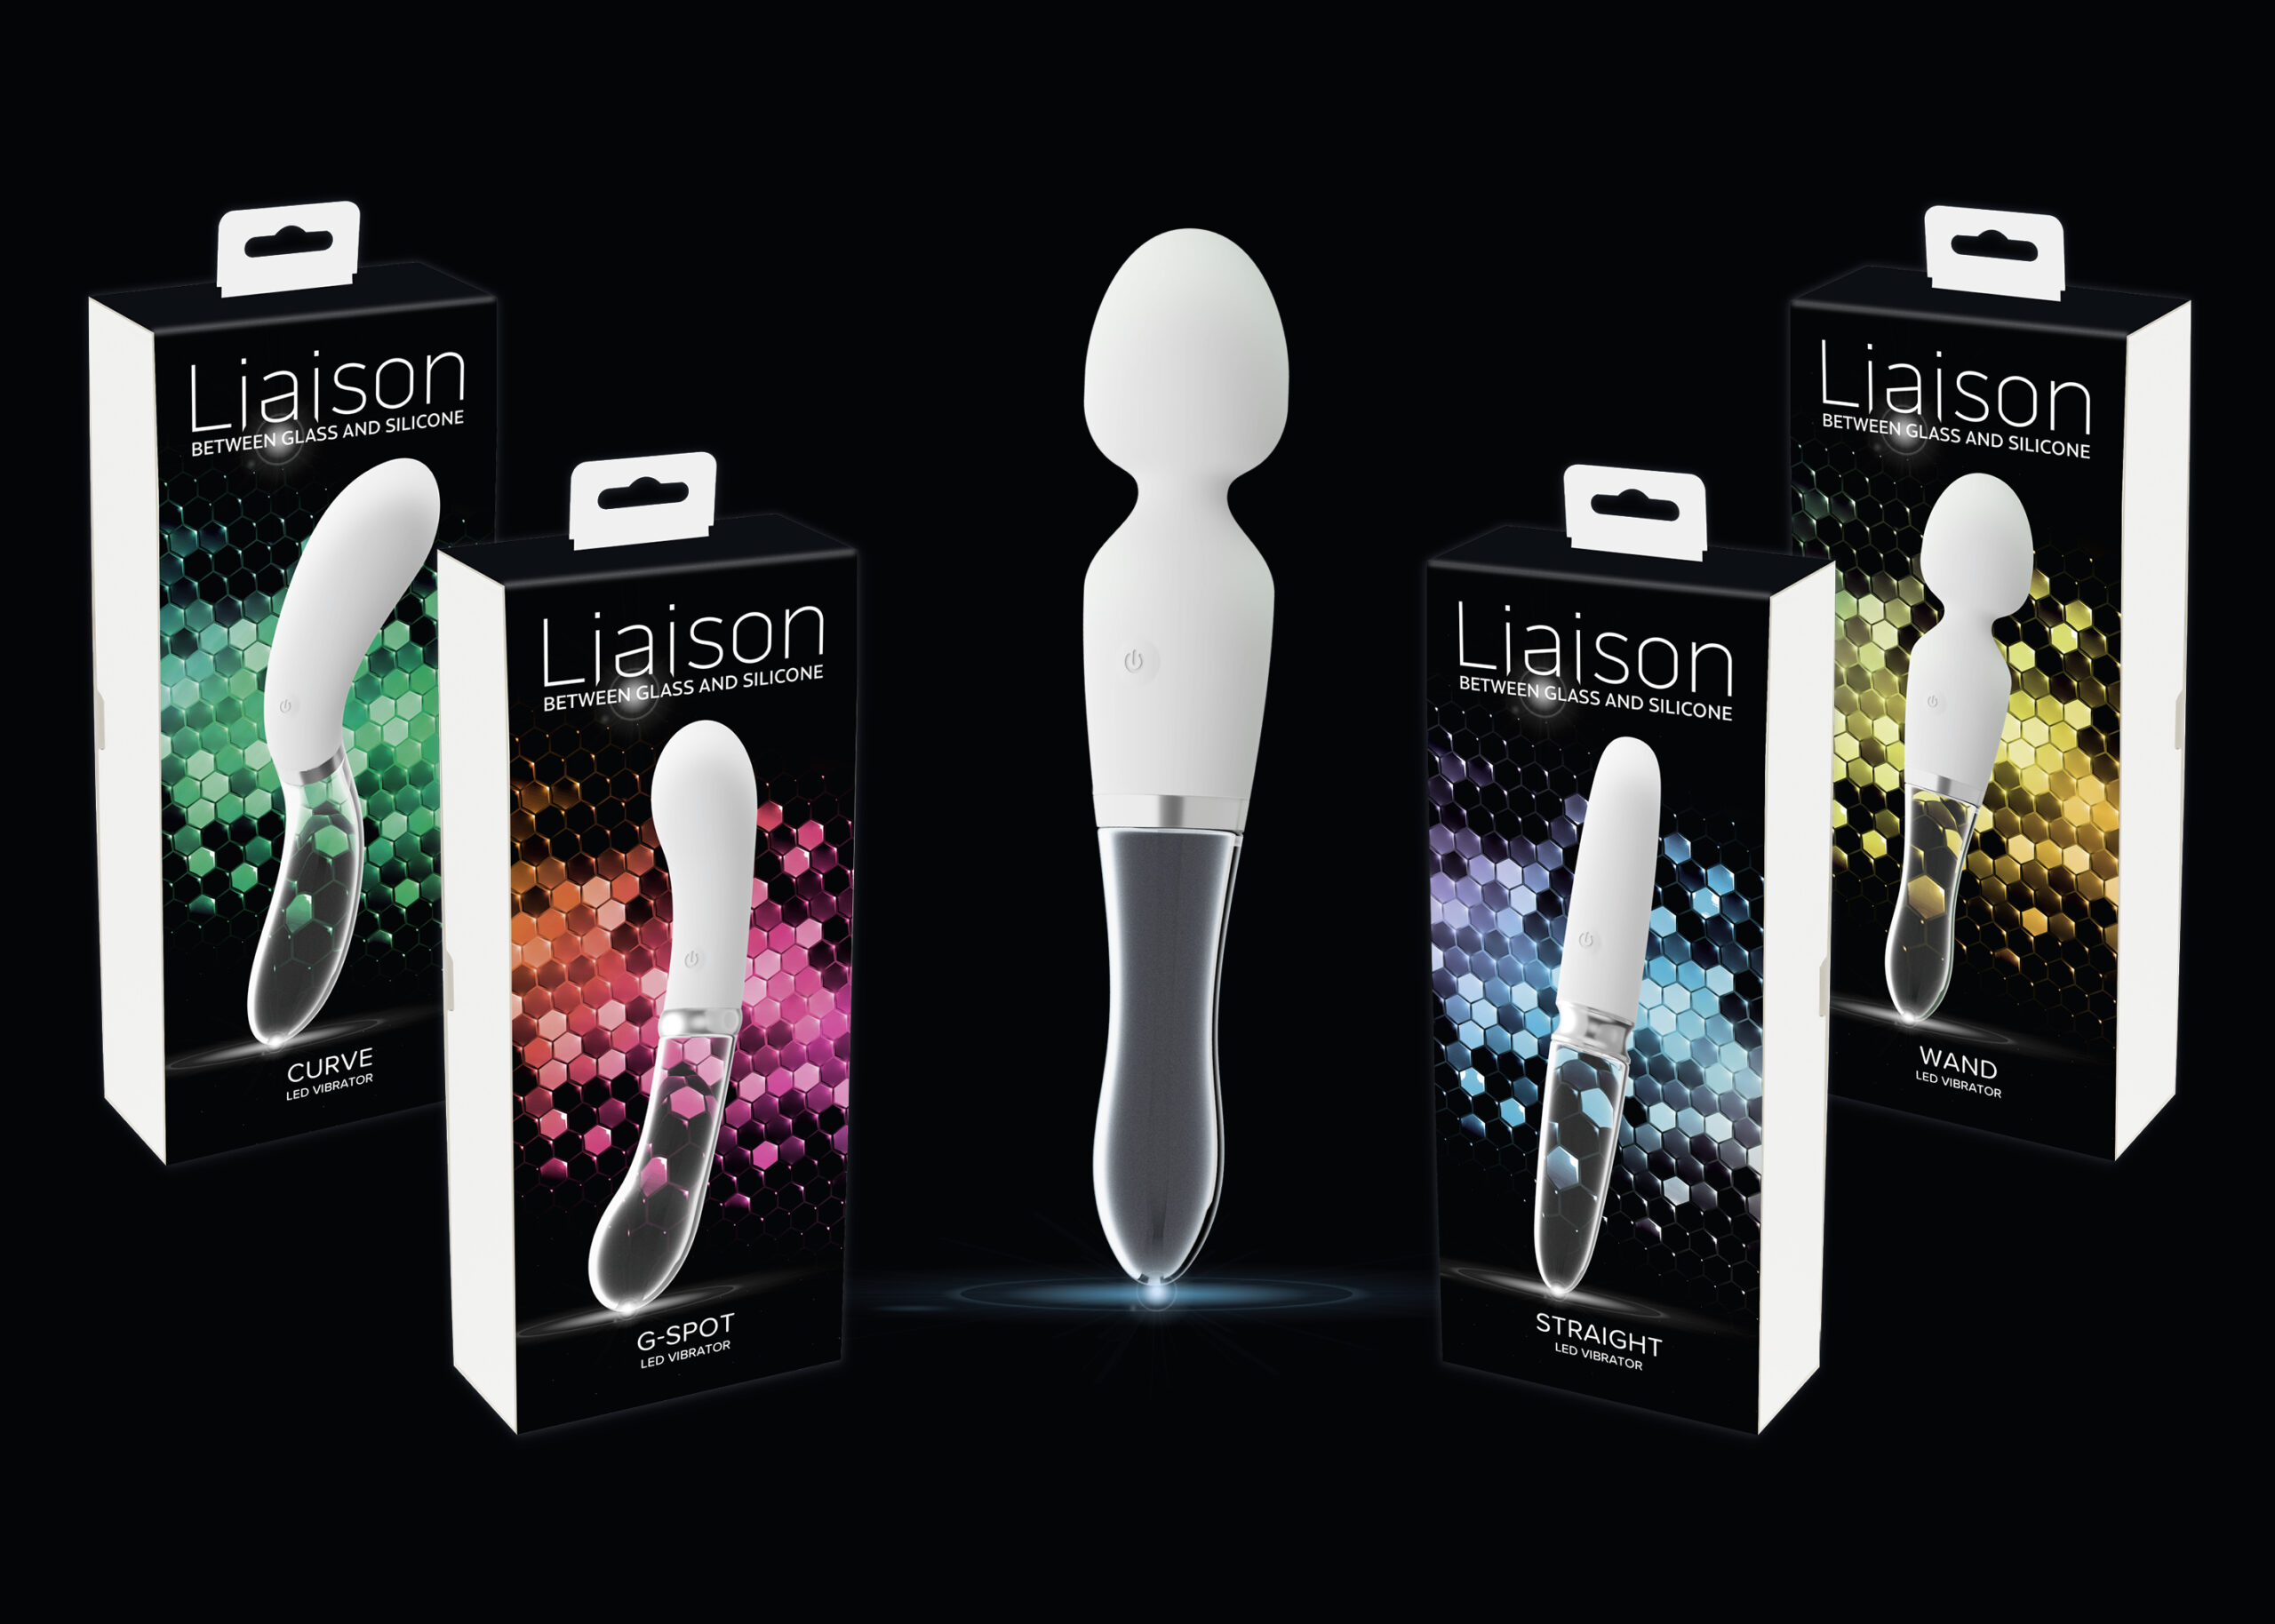 Liaison – The Powerful Sex Toys in a Luxurious Design 